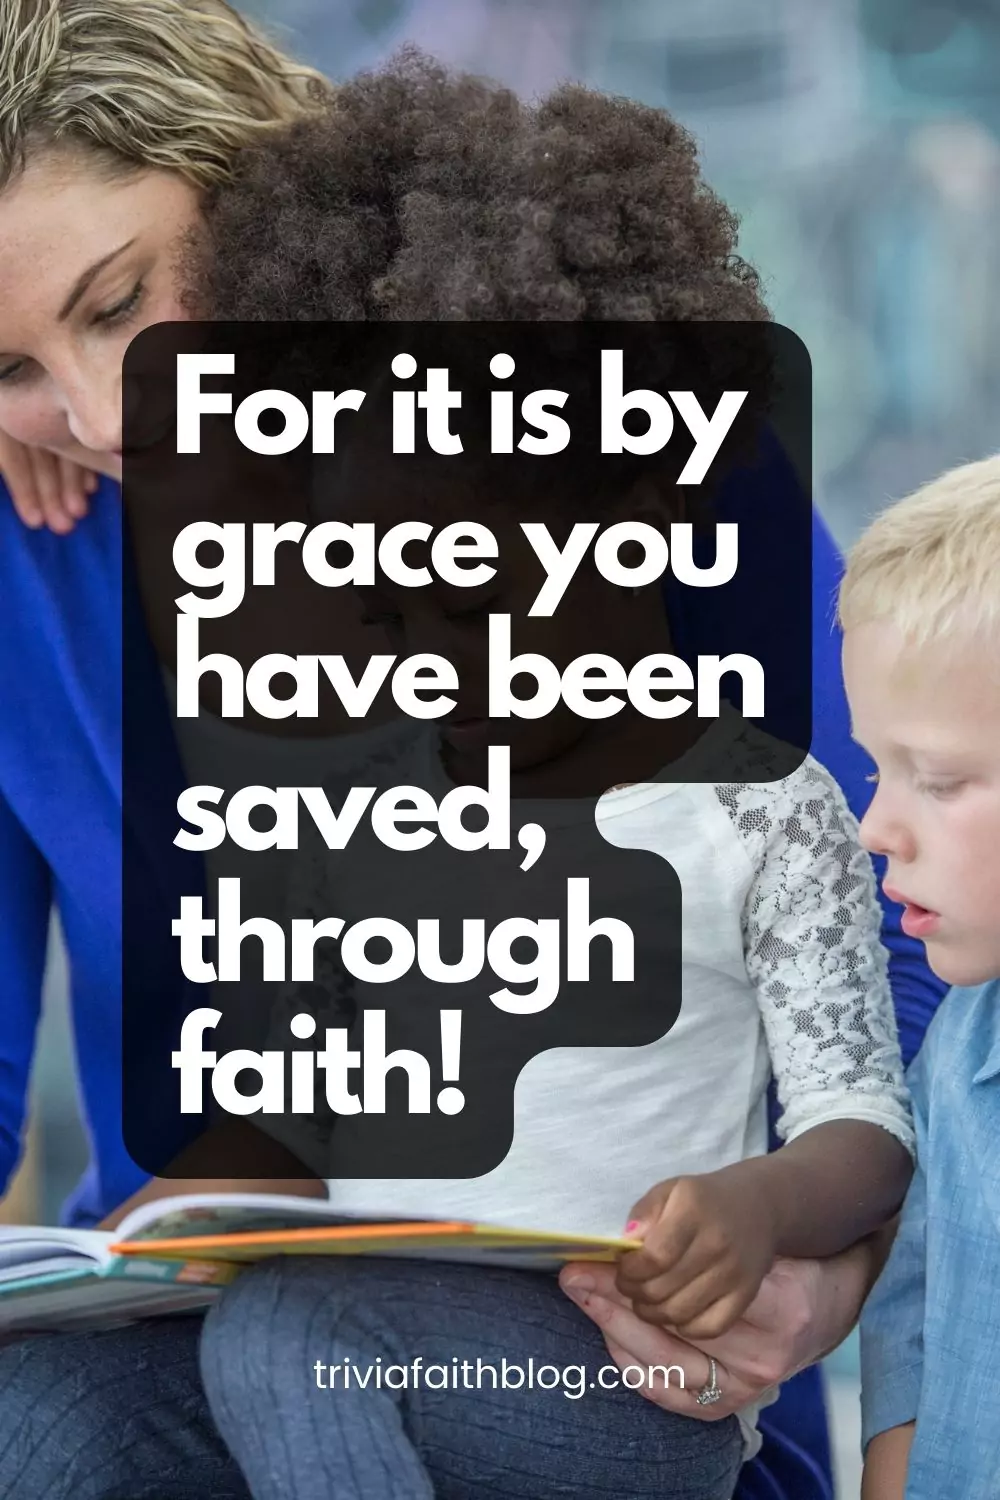 For it is by grace you have been saved, through faith